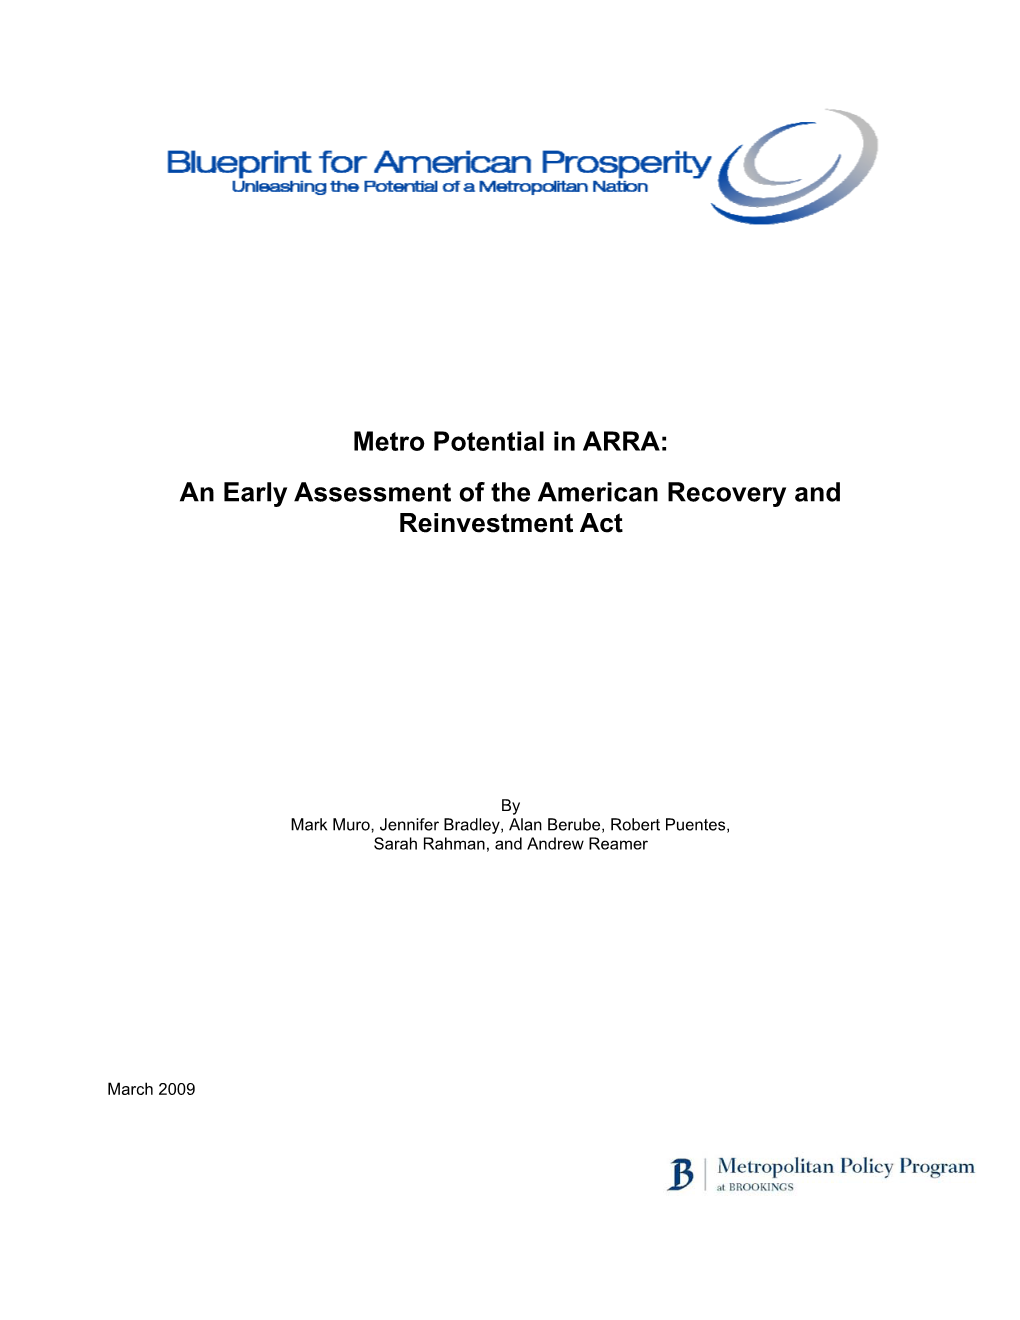 Metro Potential in ARRA: an Early Assessment of the American Recovery and Reinvestment Act